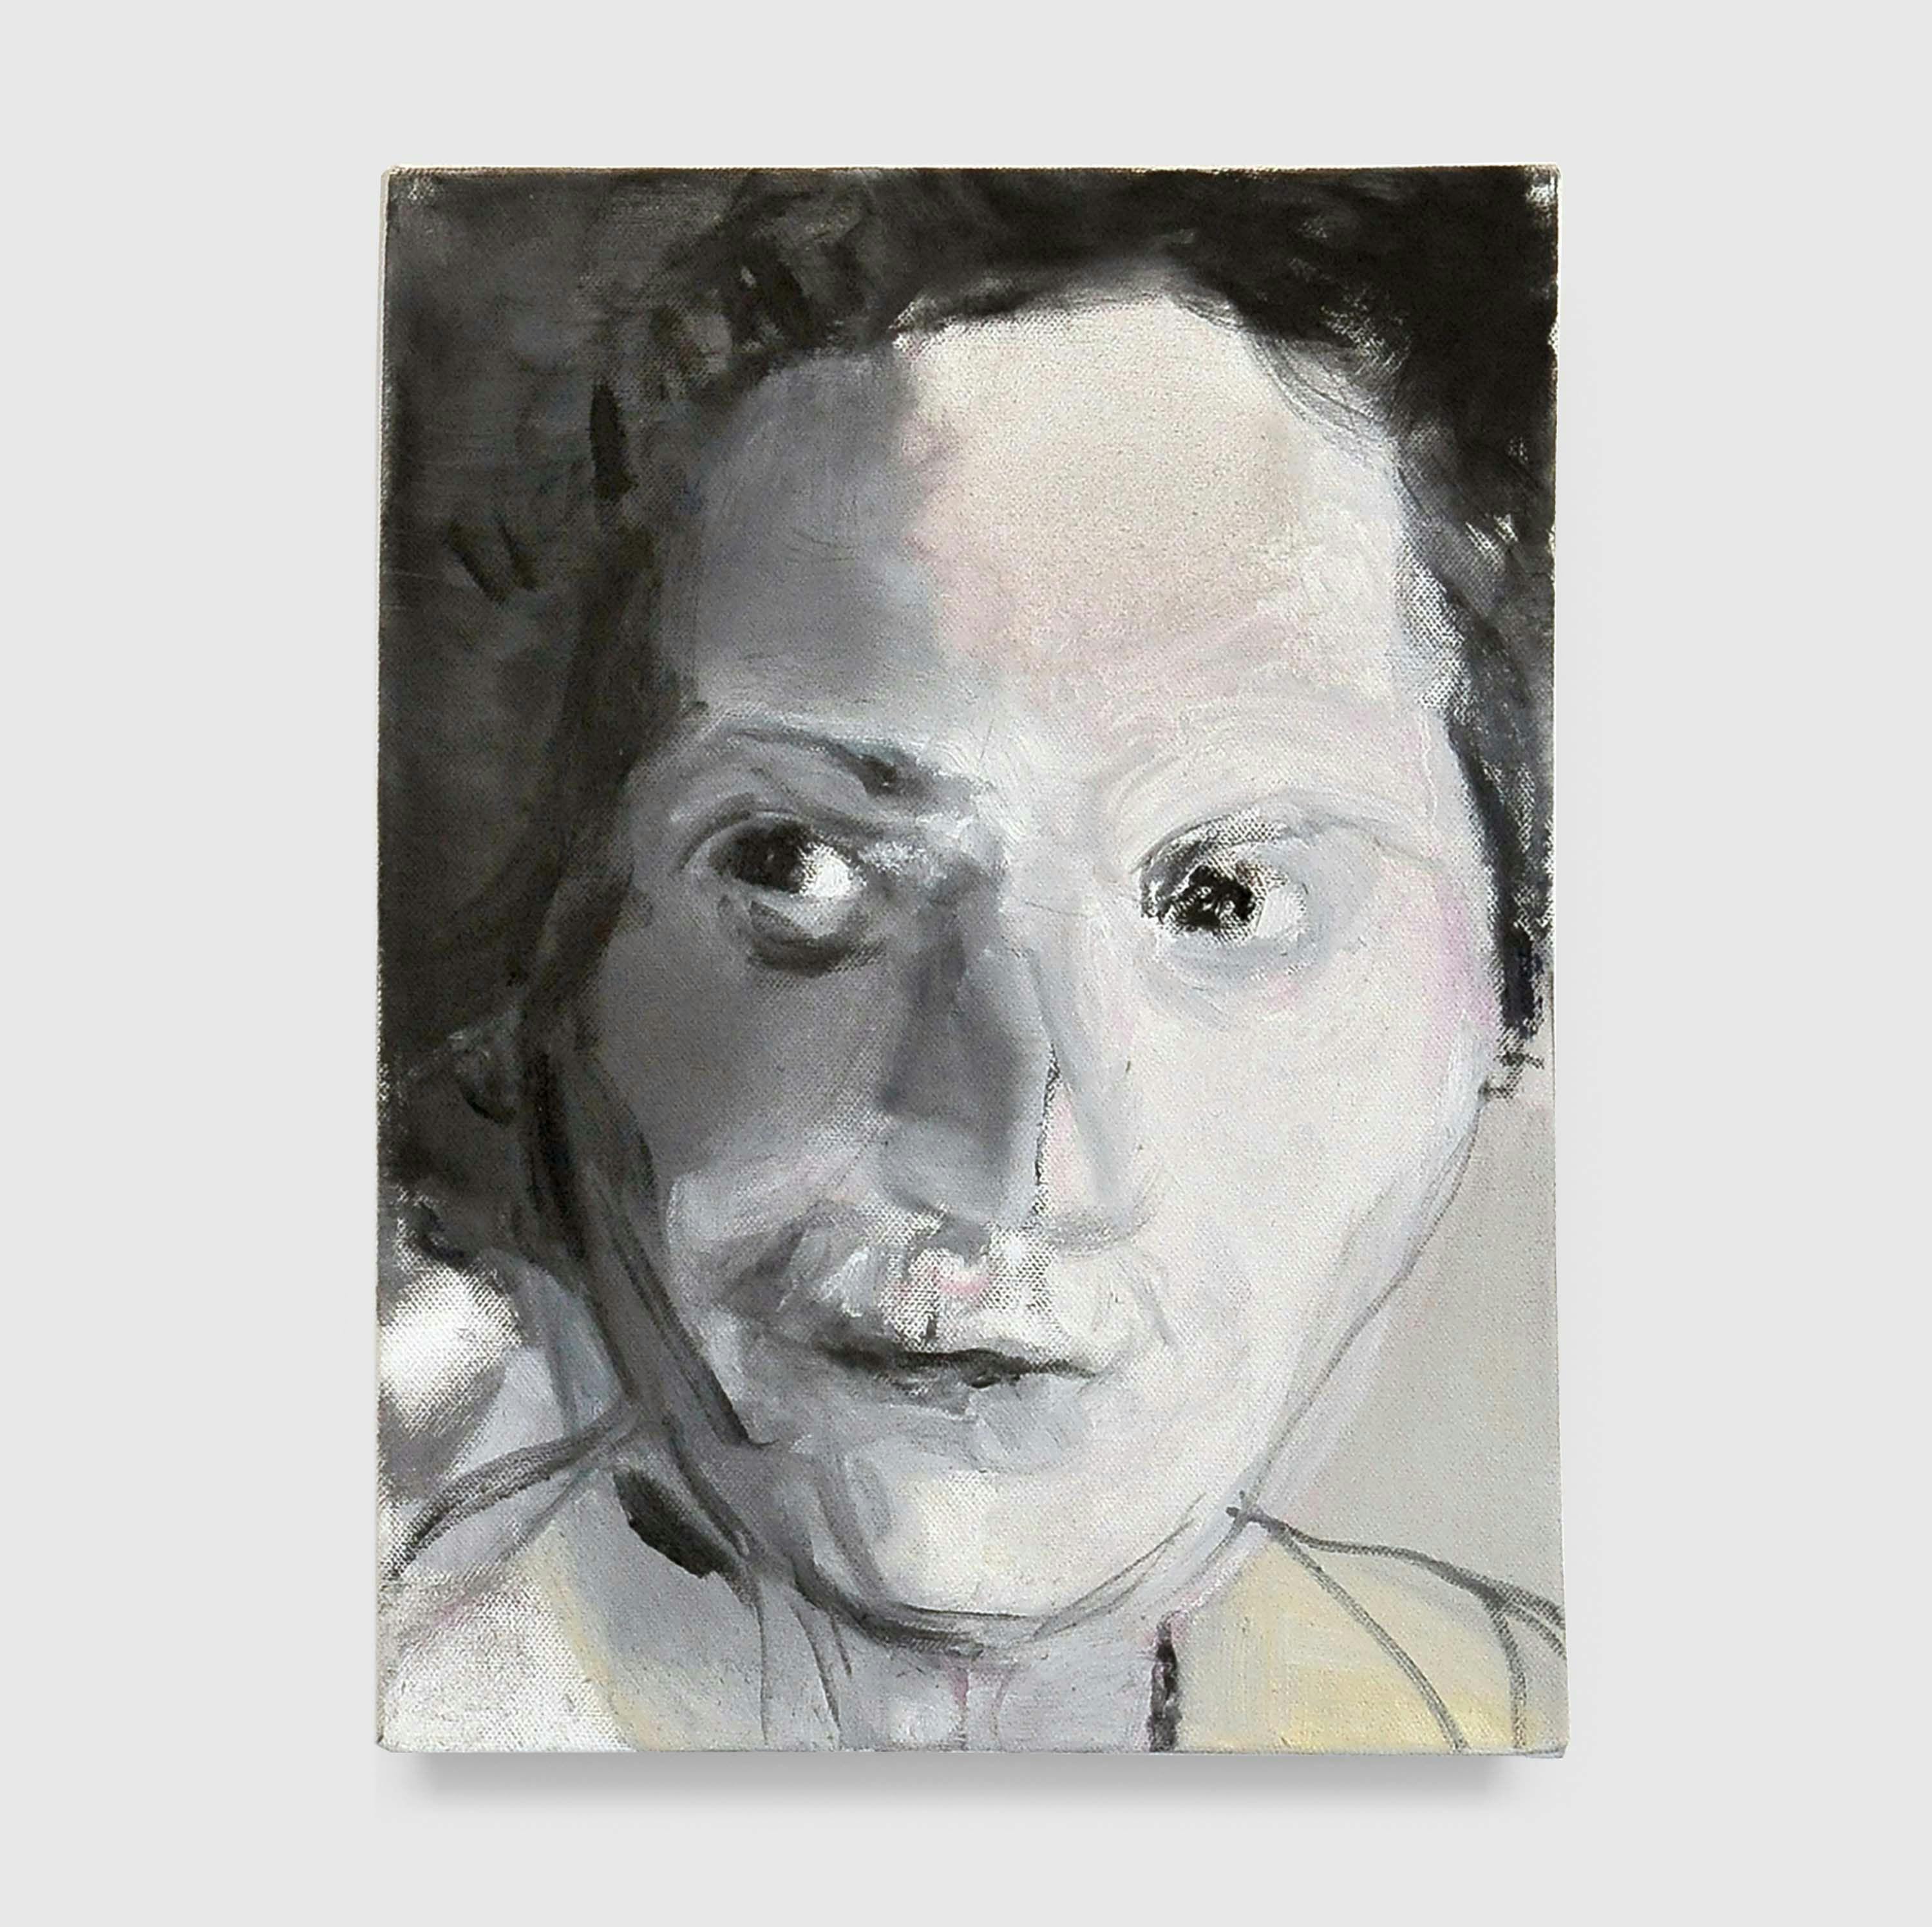 A painting by Marlene Dumas, titled Pasolini's Mother, dated 2012.